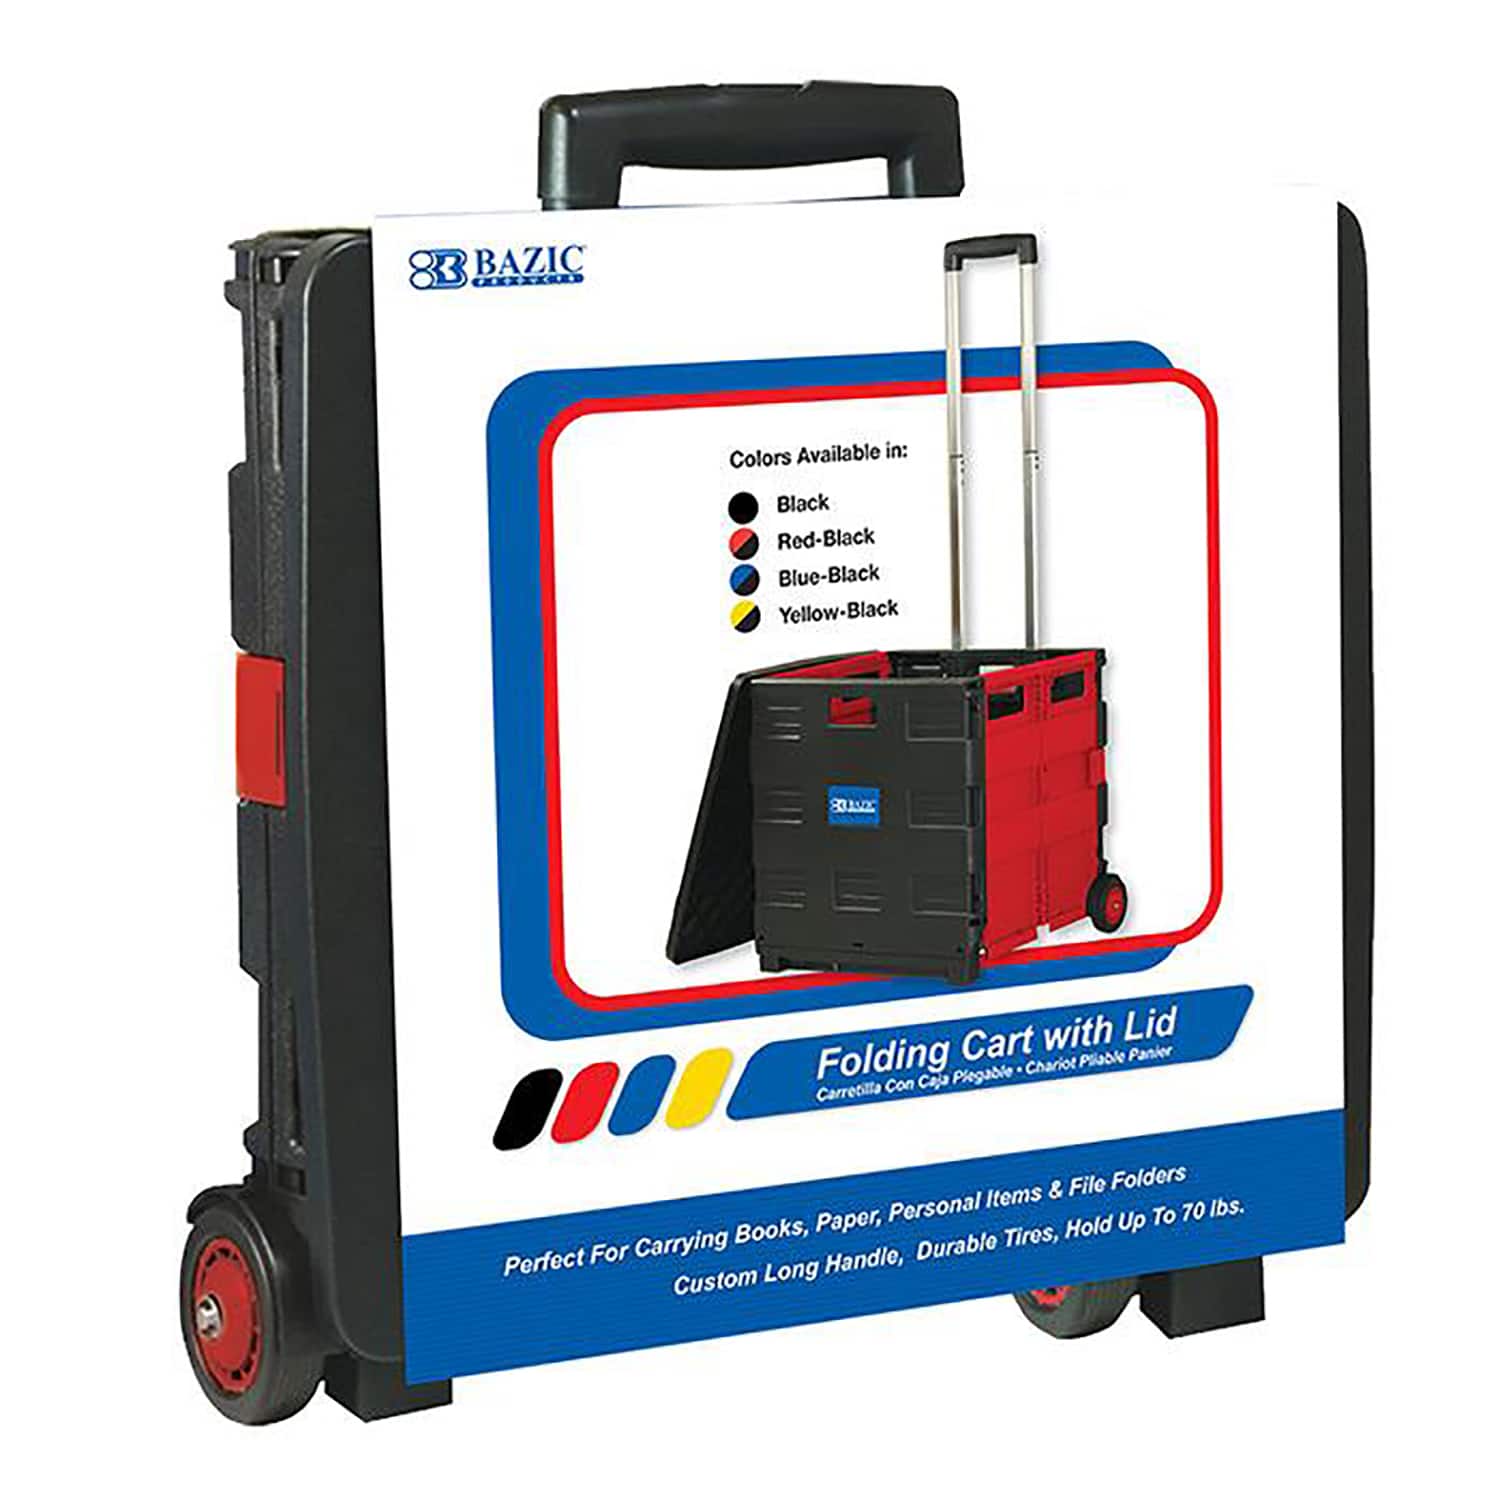 BAZIC® Folding Cart on Wheels with Lid Cover